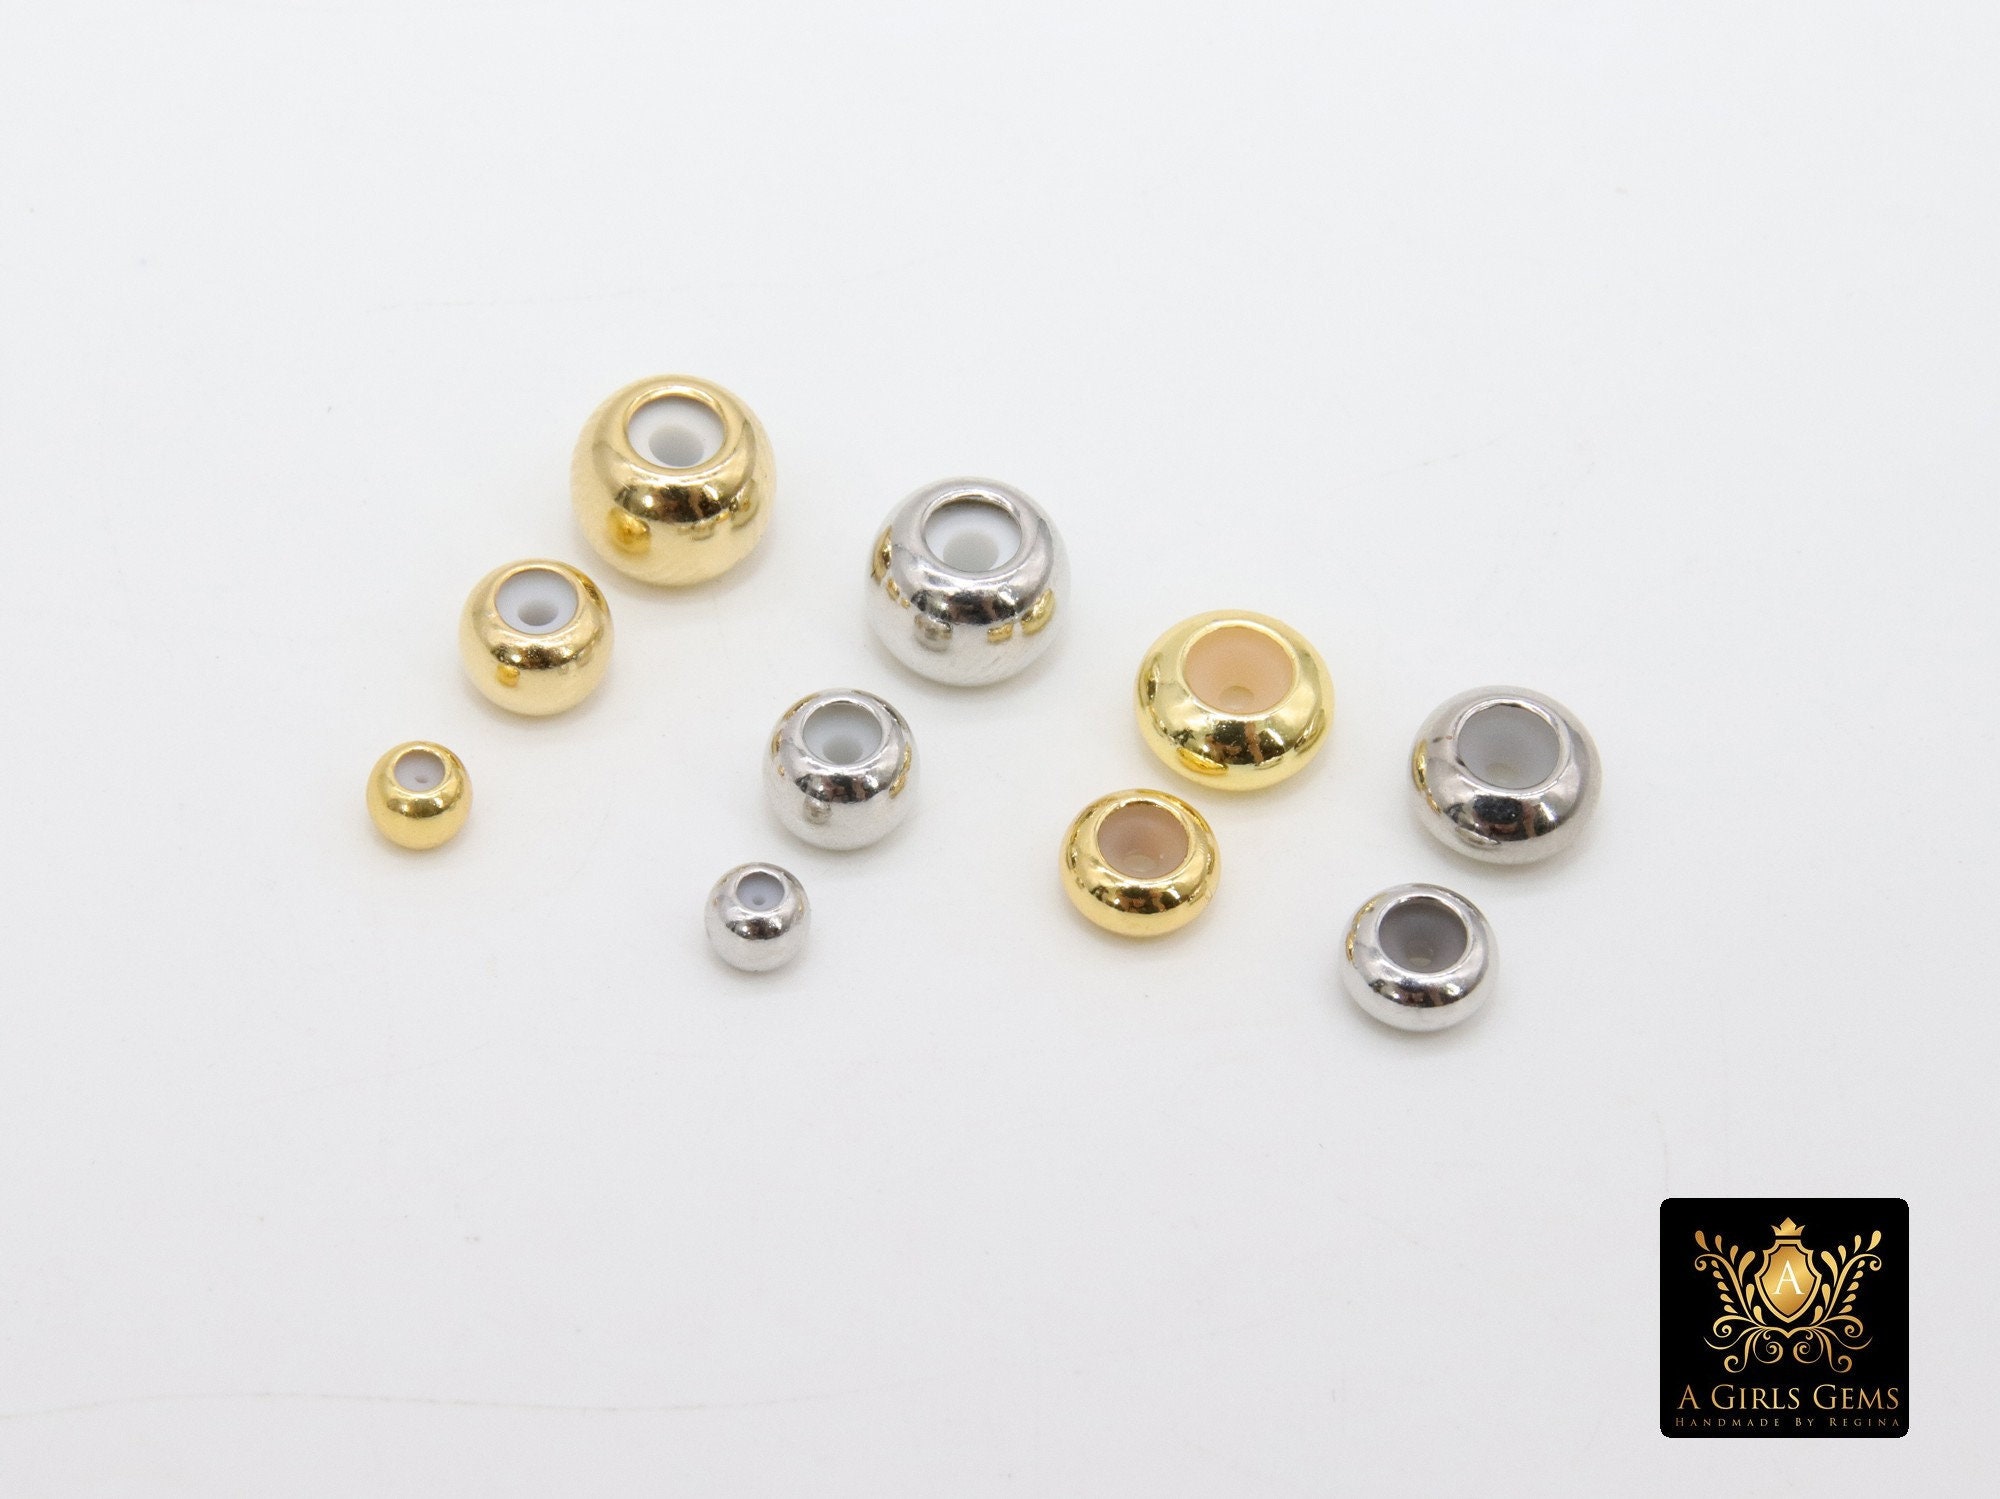 12 Pcs 8mm Round Brass Cubic Zirconia Beads 3 Colors Clear Crystal CZ  Stones Brass Round Bracelet Connector Charms Beads for Jewelry Making 